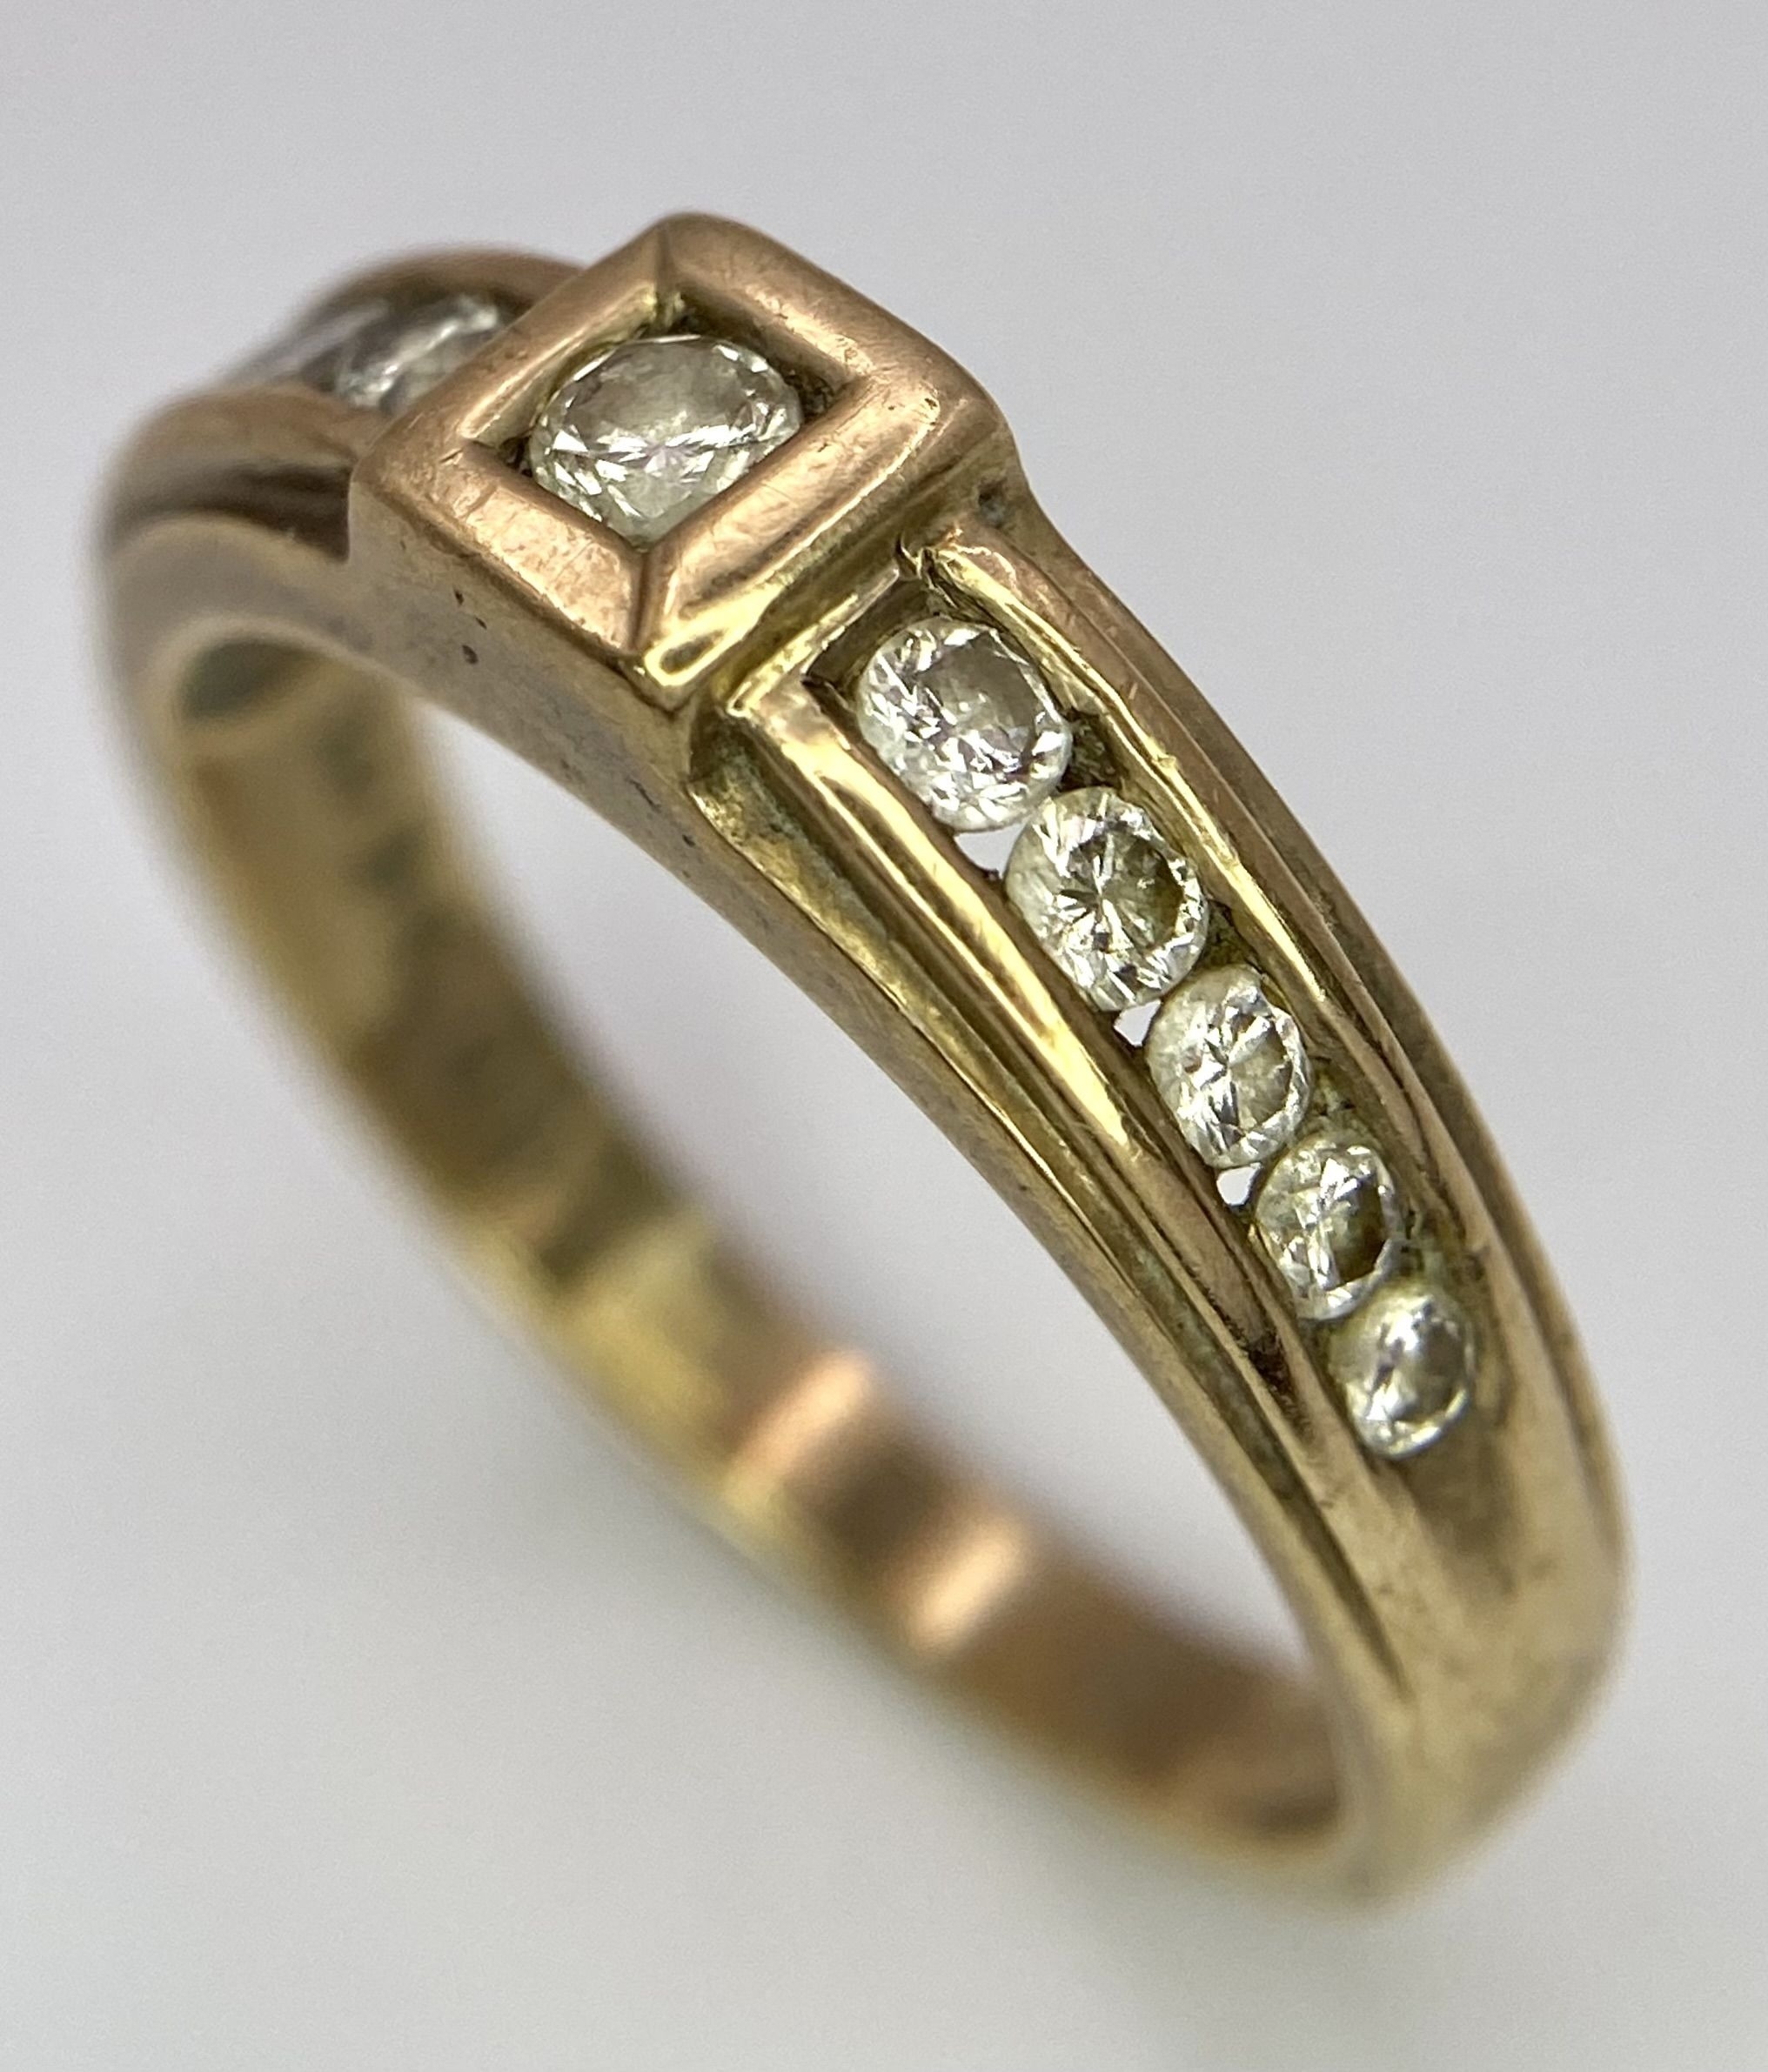 A Vintage 9K Yellow Gold Diamond Half-Eternity Ring. Belt buckle design. Size R. 3.7g total weight. - Image 4 of 6